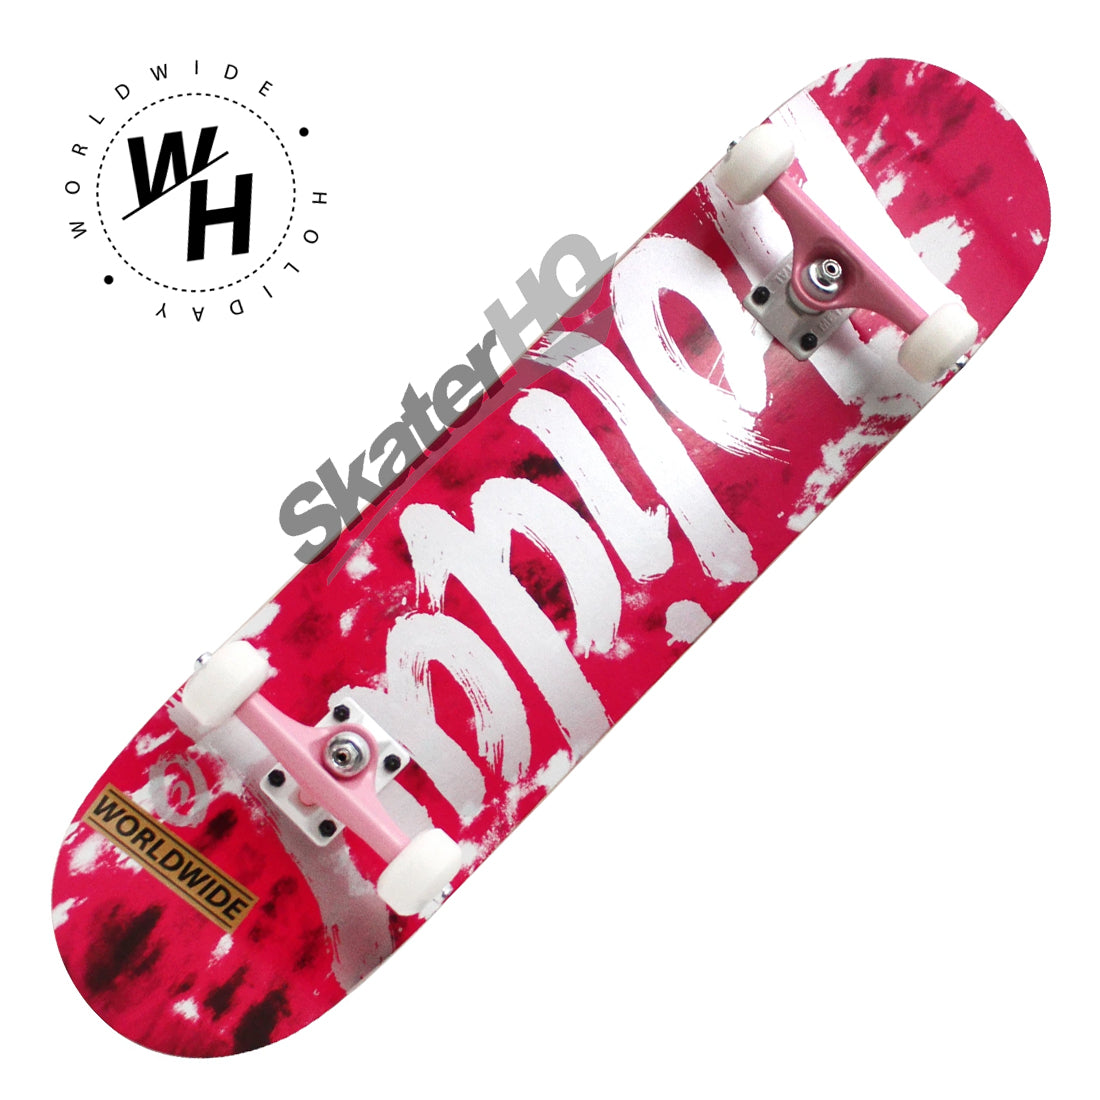 Holiday Tie Dye 7.5 Complete - Pink/Silver Skateboard Completes Modern Street